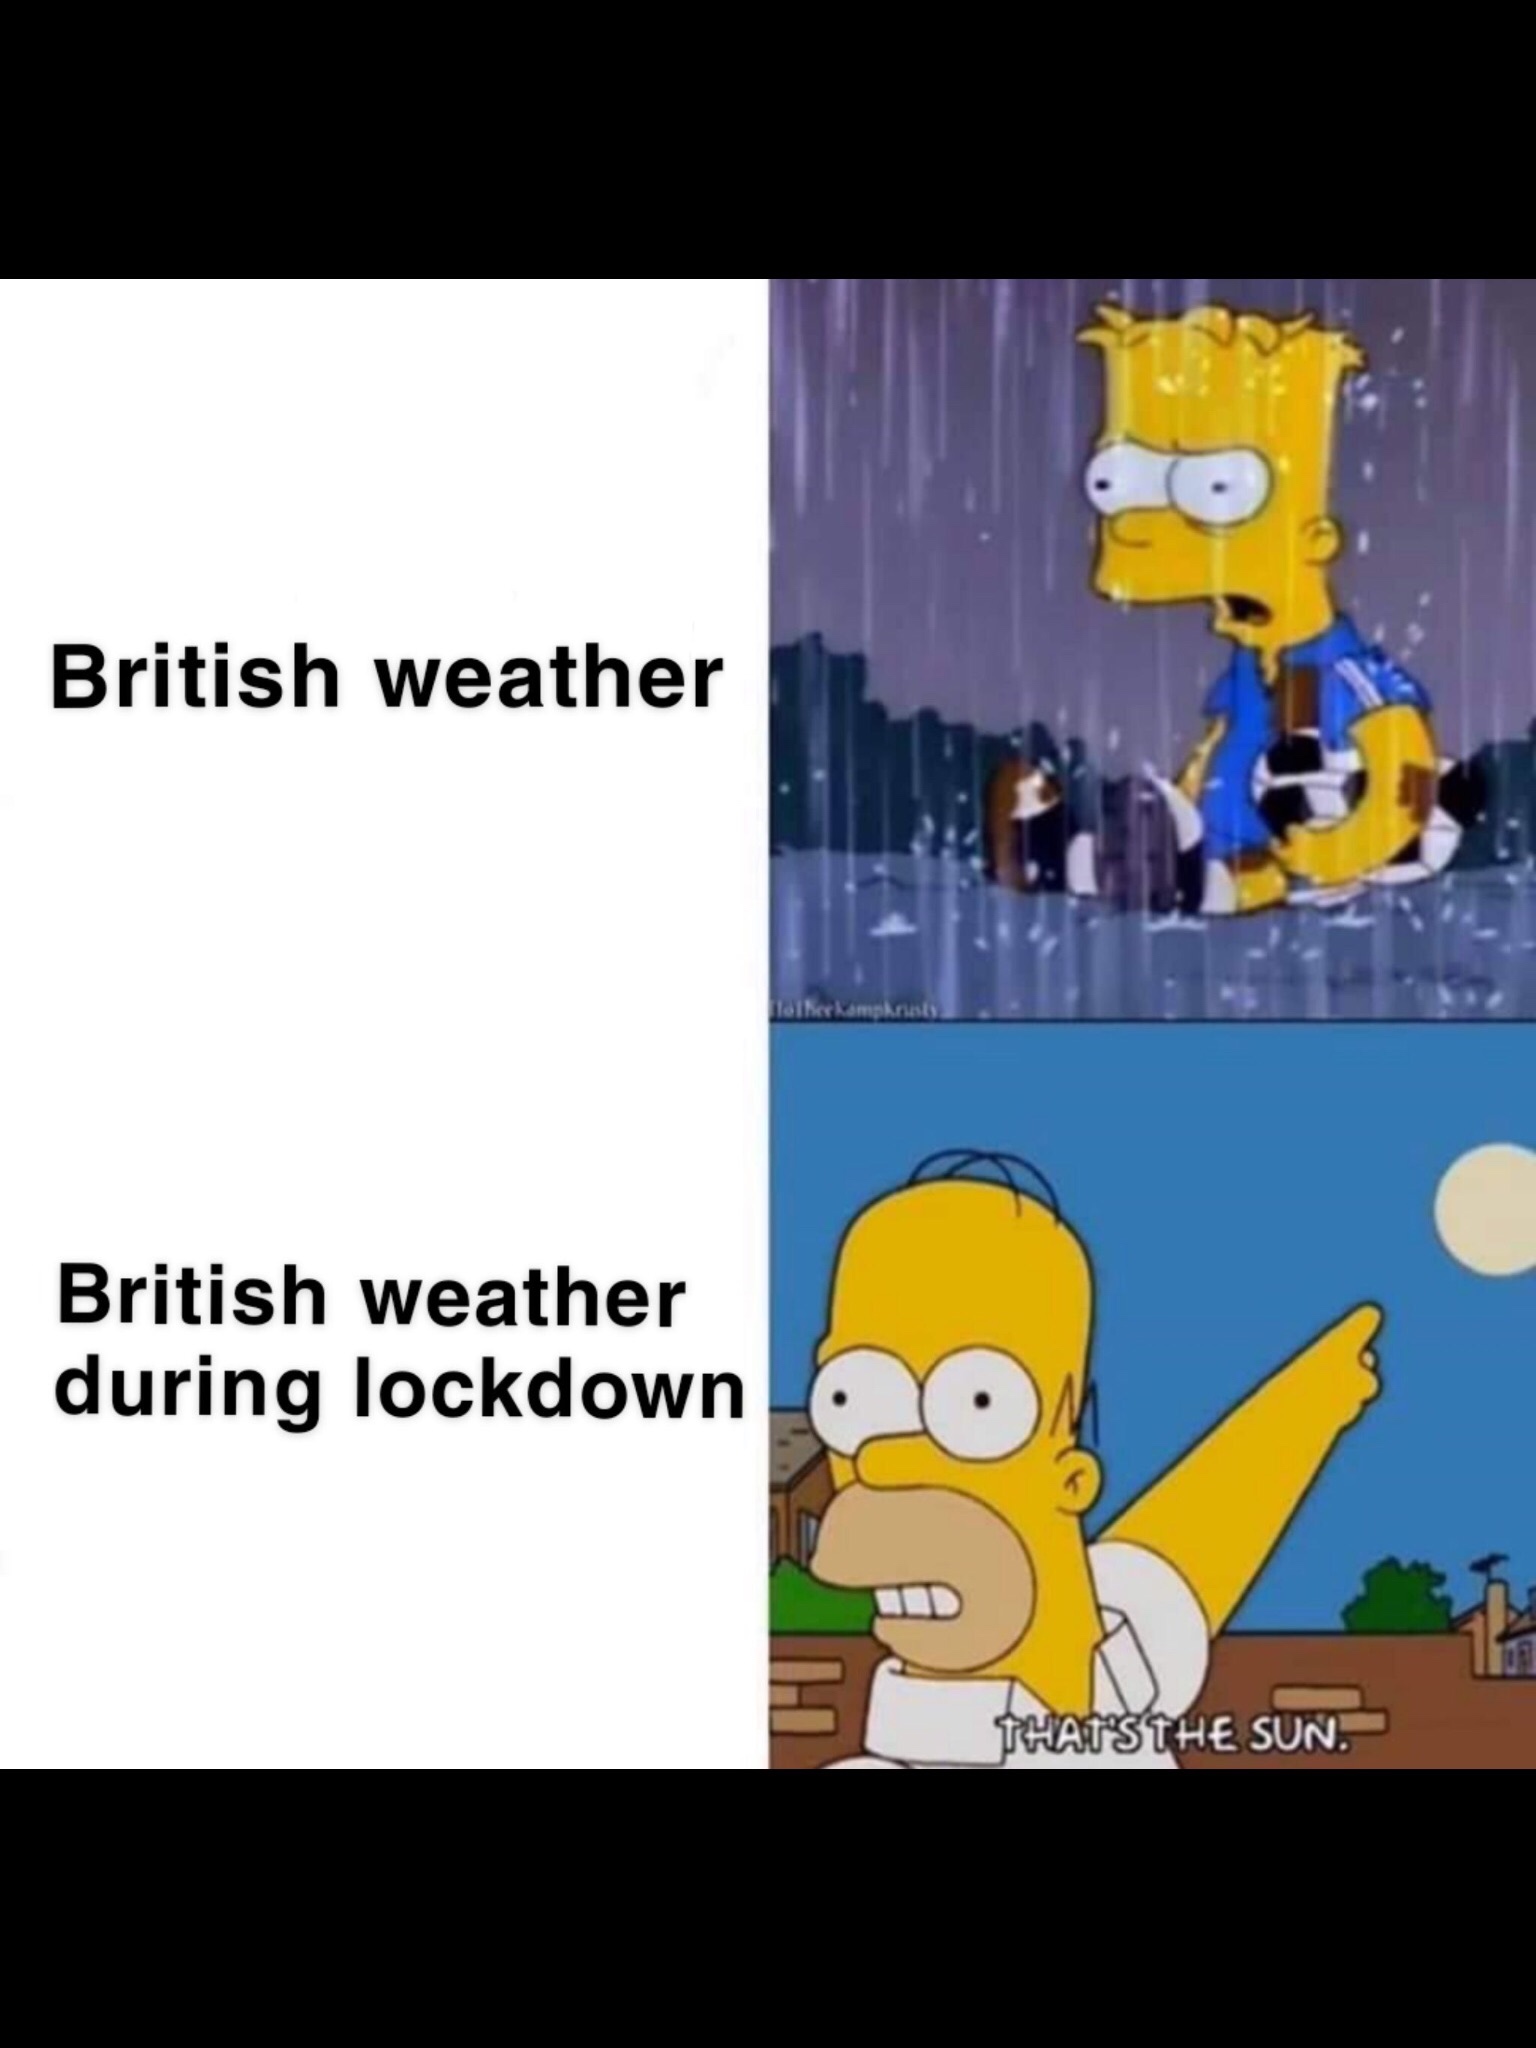 dutch weather normally dutch weather during isolation - British weather laiko kampas British weather during lockdown Fd That'S The Sun.